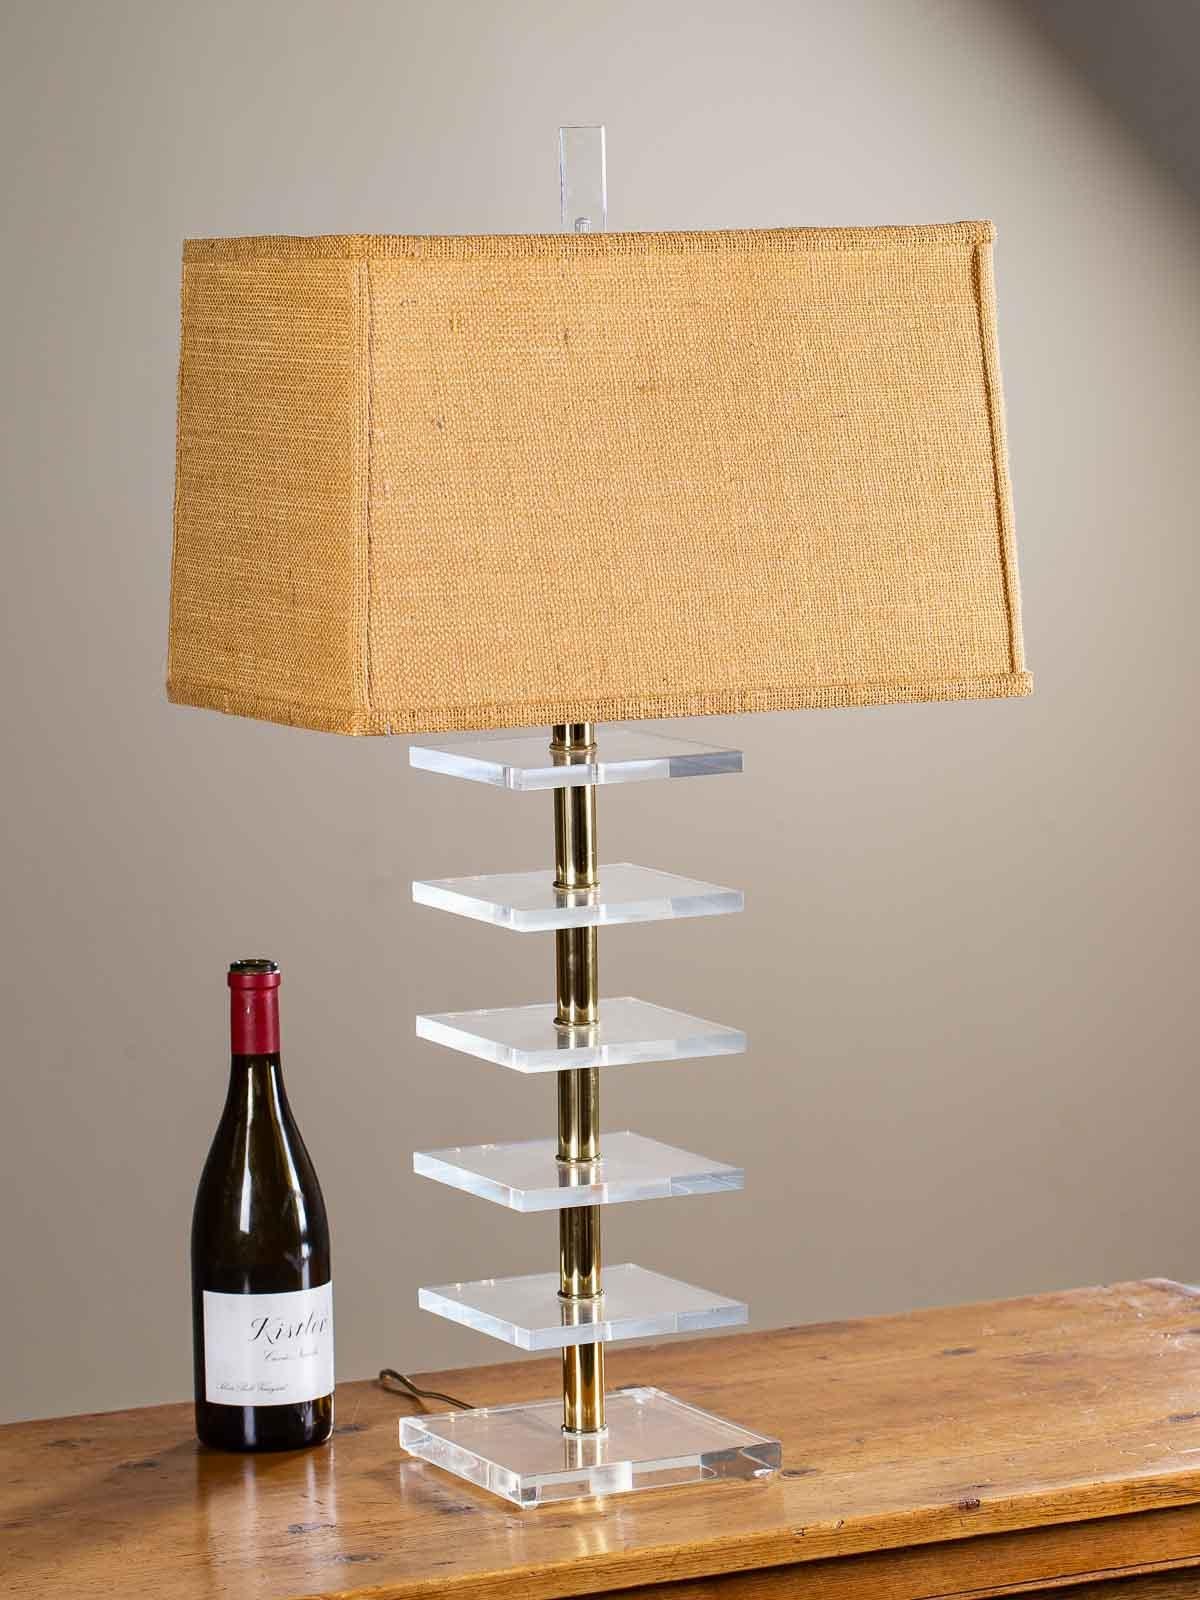 This Lucite and brass Mid-Century Modern lamp from France, circa 1965 has a unique arrangement of six square blocks of Lucite separated by brass cylinders. The distance between the Lucite sheets and the gleam of the brass give an intriguing